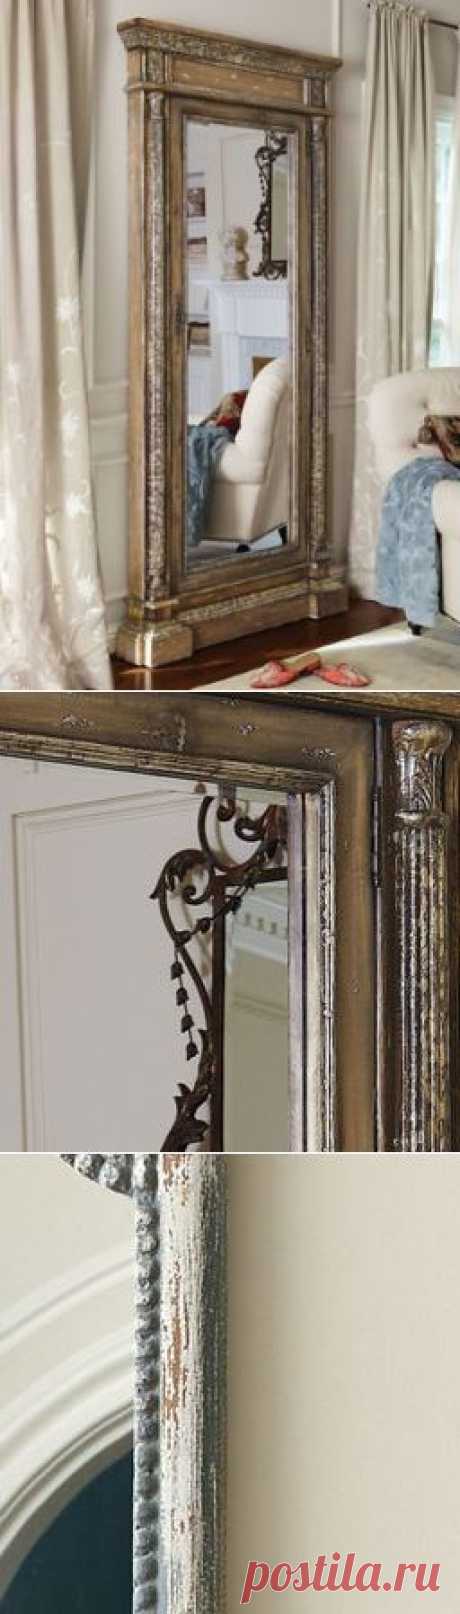 Lyons Mirror - French Style Full Length Mirror, Armoire Door Mirror | Soft Surroundings